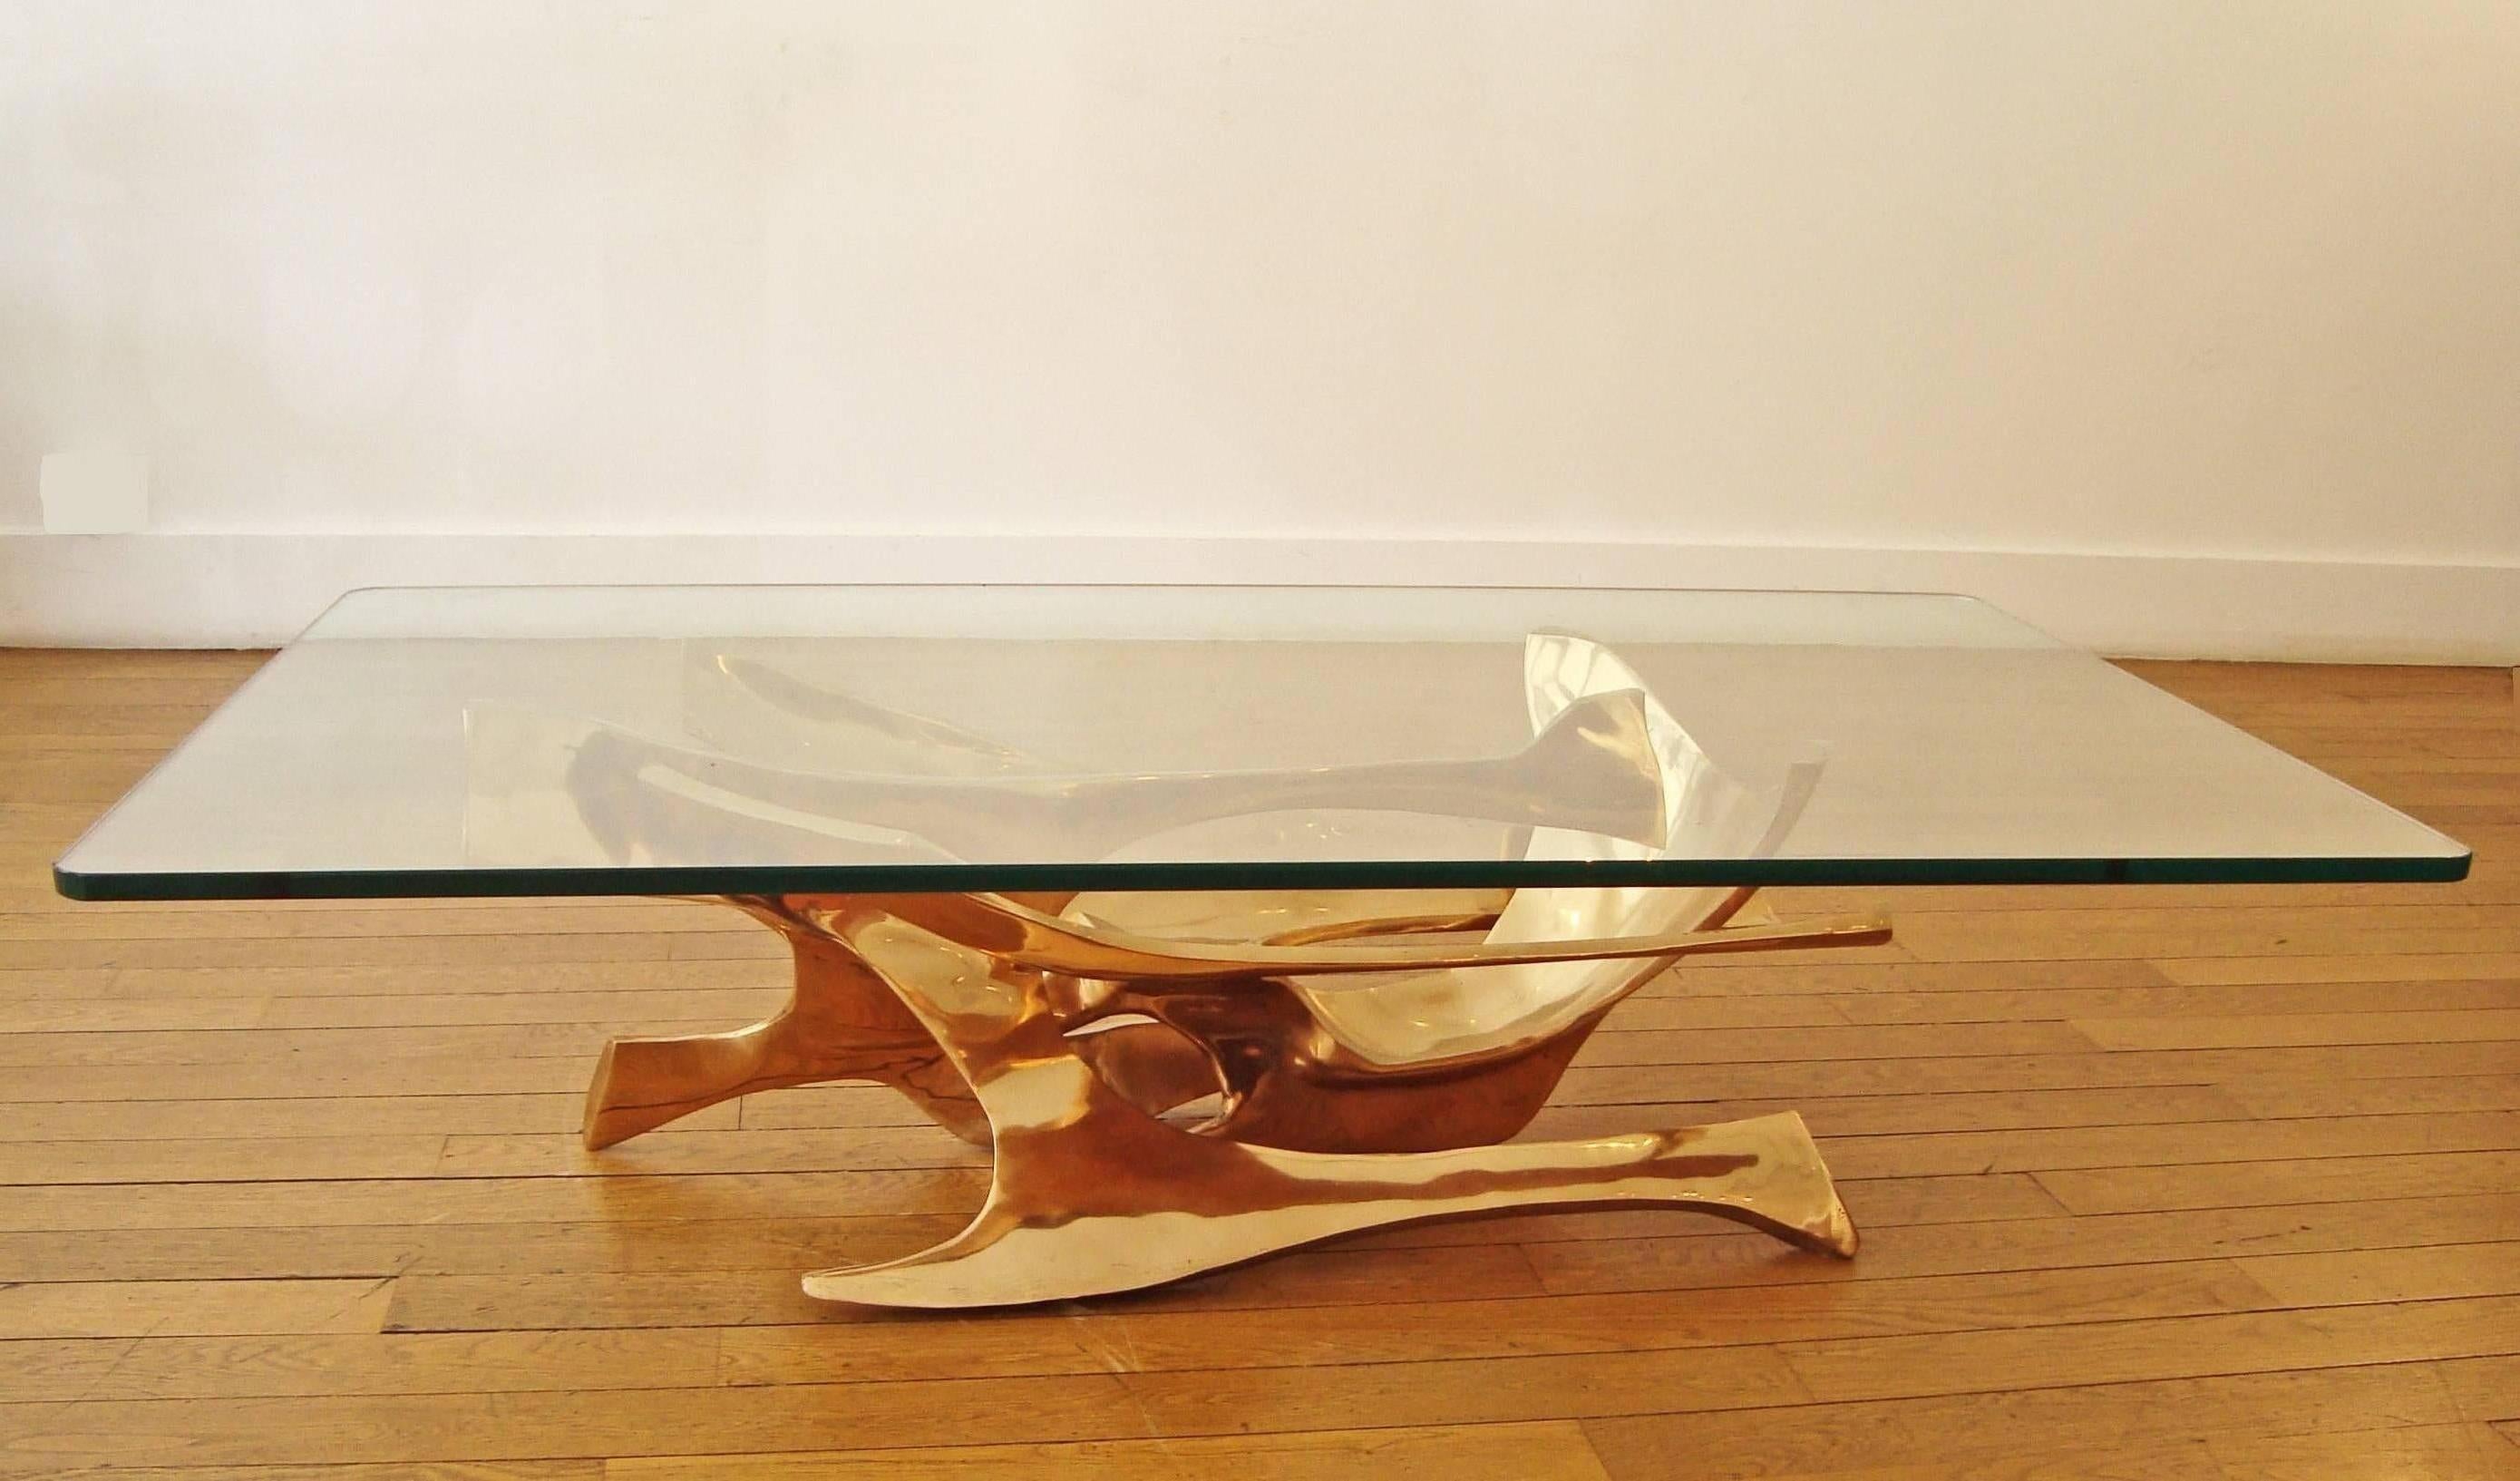 Beautiful gilt polished bronze sculpture as a coffee table by Fred Brouard, 1970s.
With a rectangular glass top.
Signed and numbered 2/4.
Bronze base only Height 13 x length 37 x depth 18 inches. 

Fred Brouard (1944-1999), met Alicia Penalba